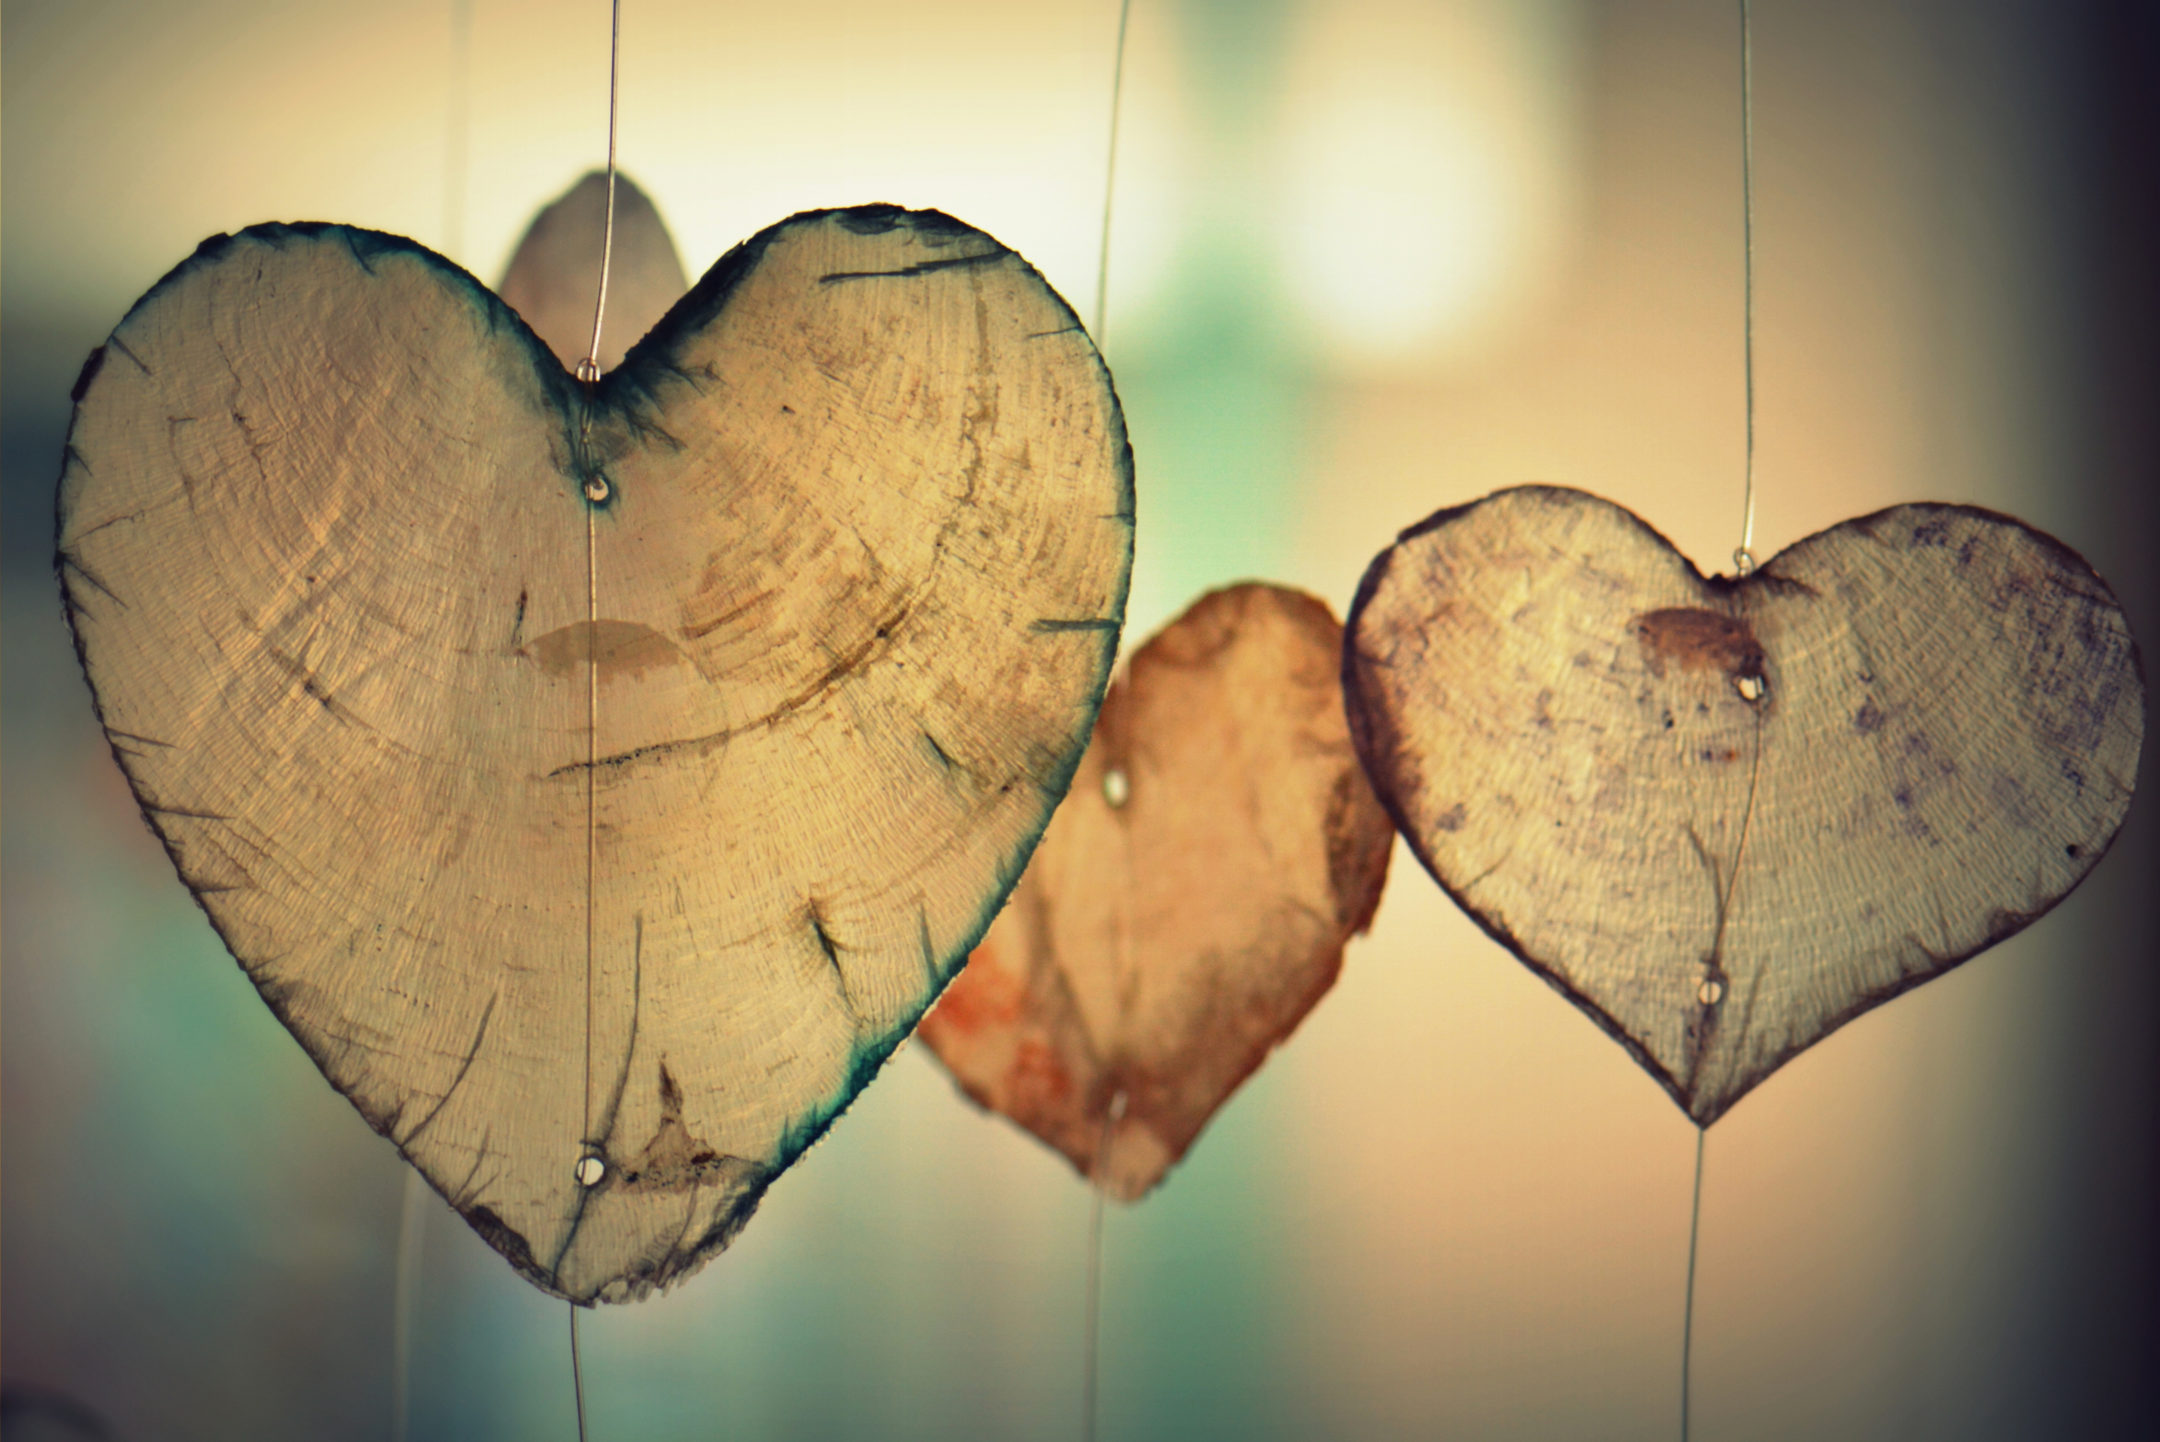 Three hearts made of old wood